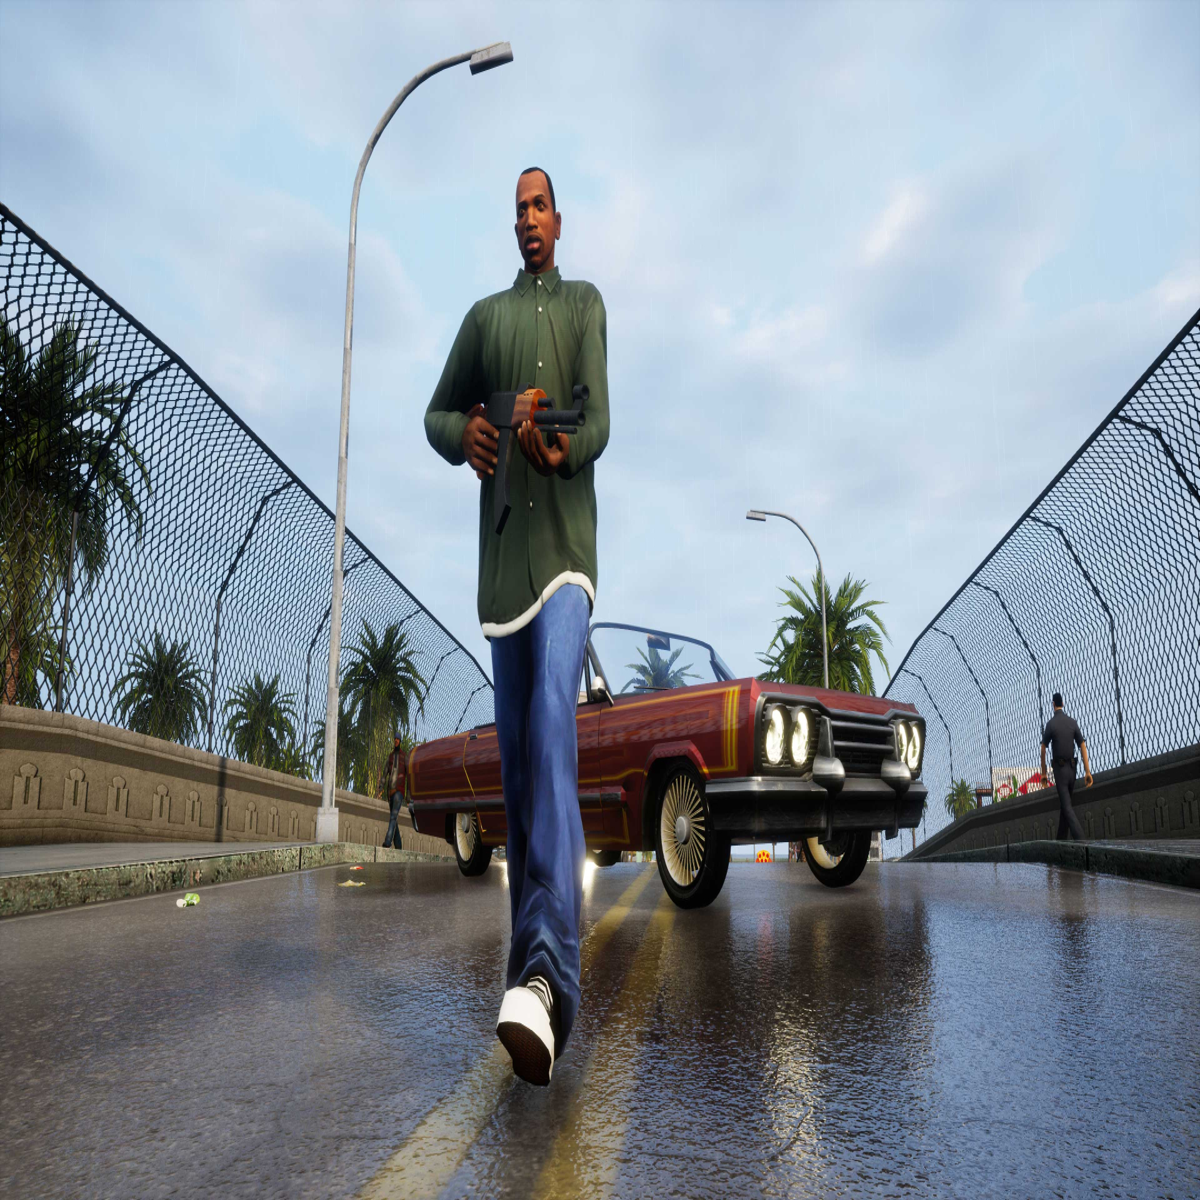 Grand Theft Auto 3 Steam Deck - You NEED TO KNOW This Before You